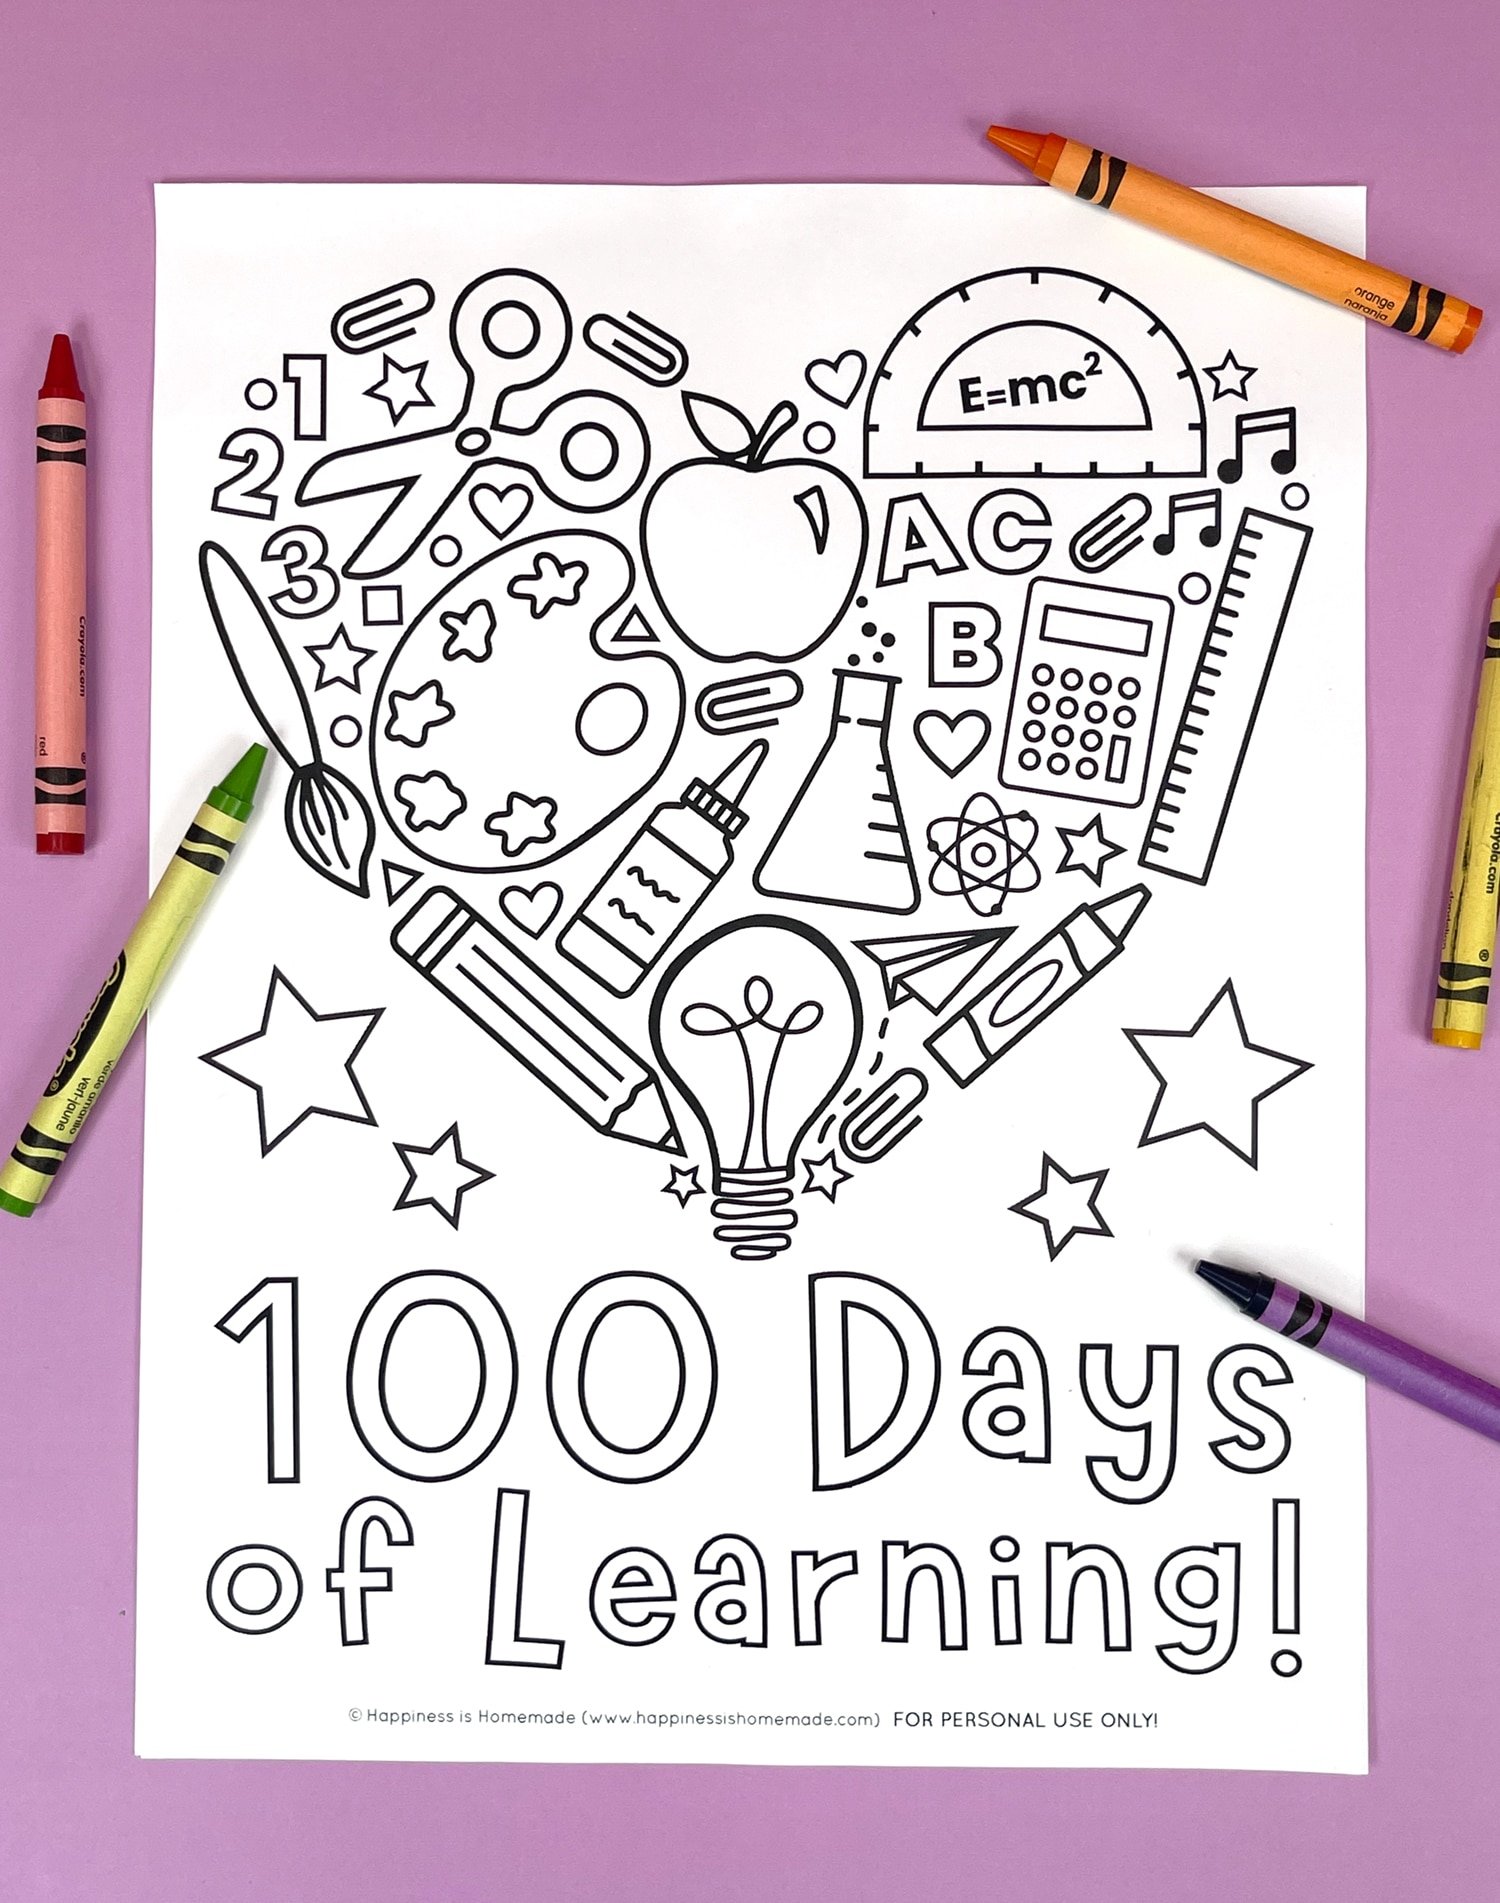 "100 Days of Learning" printable coloring page on purple background with crayons